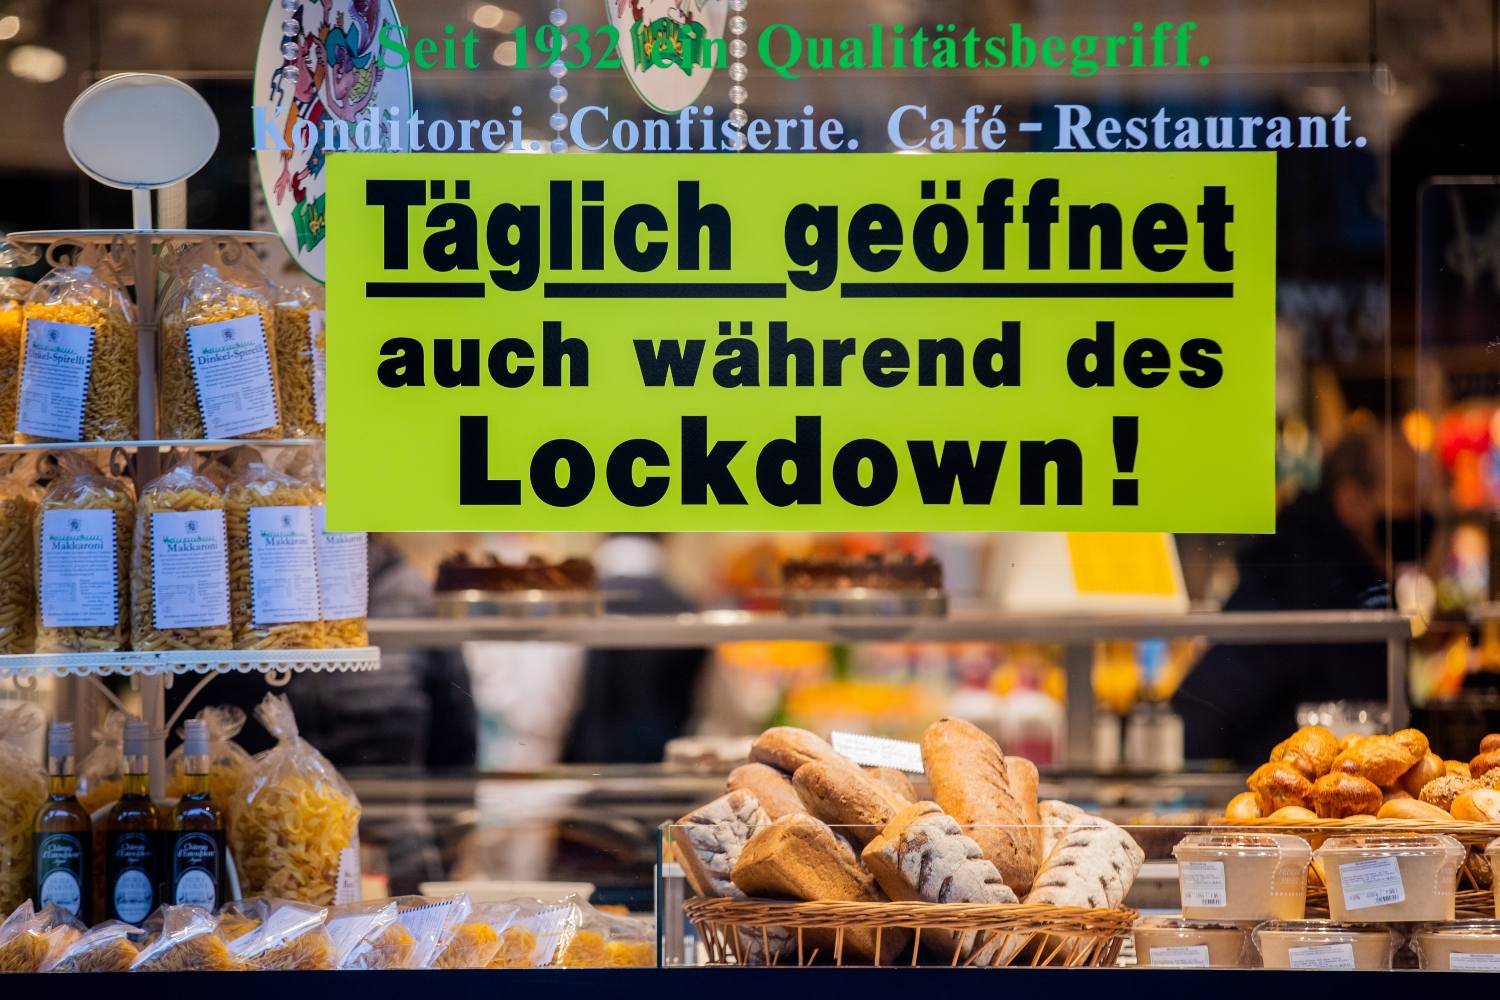 'Lockdown' voted Germany's English word of the year